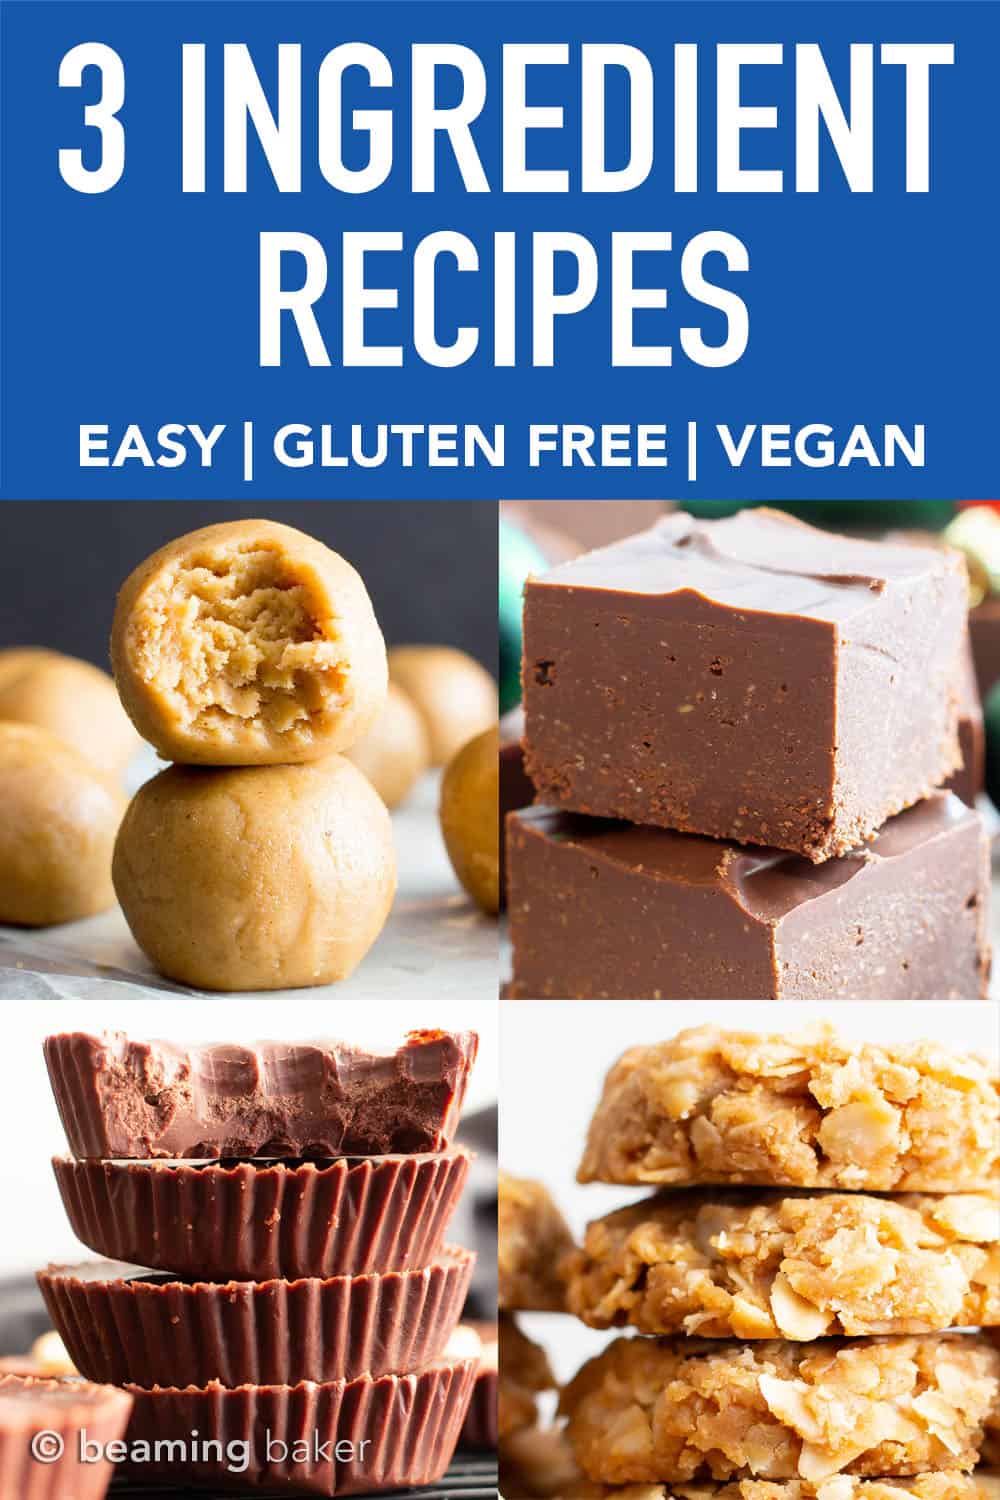 25+ Quick & Easy 3 Ingredient Recipes: my favorite Vegan + Gluten Free, healthy 3 ingredient recipes—from cookies to fudge and energy bites & ice cream! Make these recipes in no time! #3Ingredient #Recipes #Vegan #GlutenFree #Easy | Recipes at BeamingBaker.com